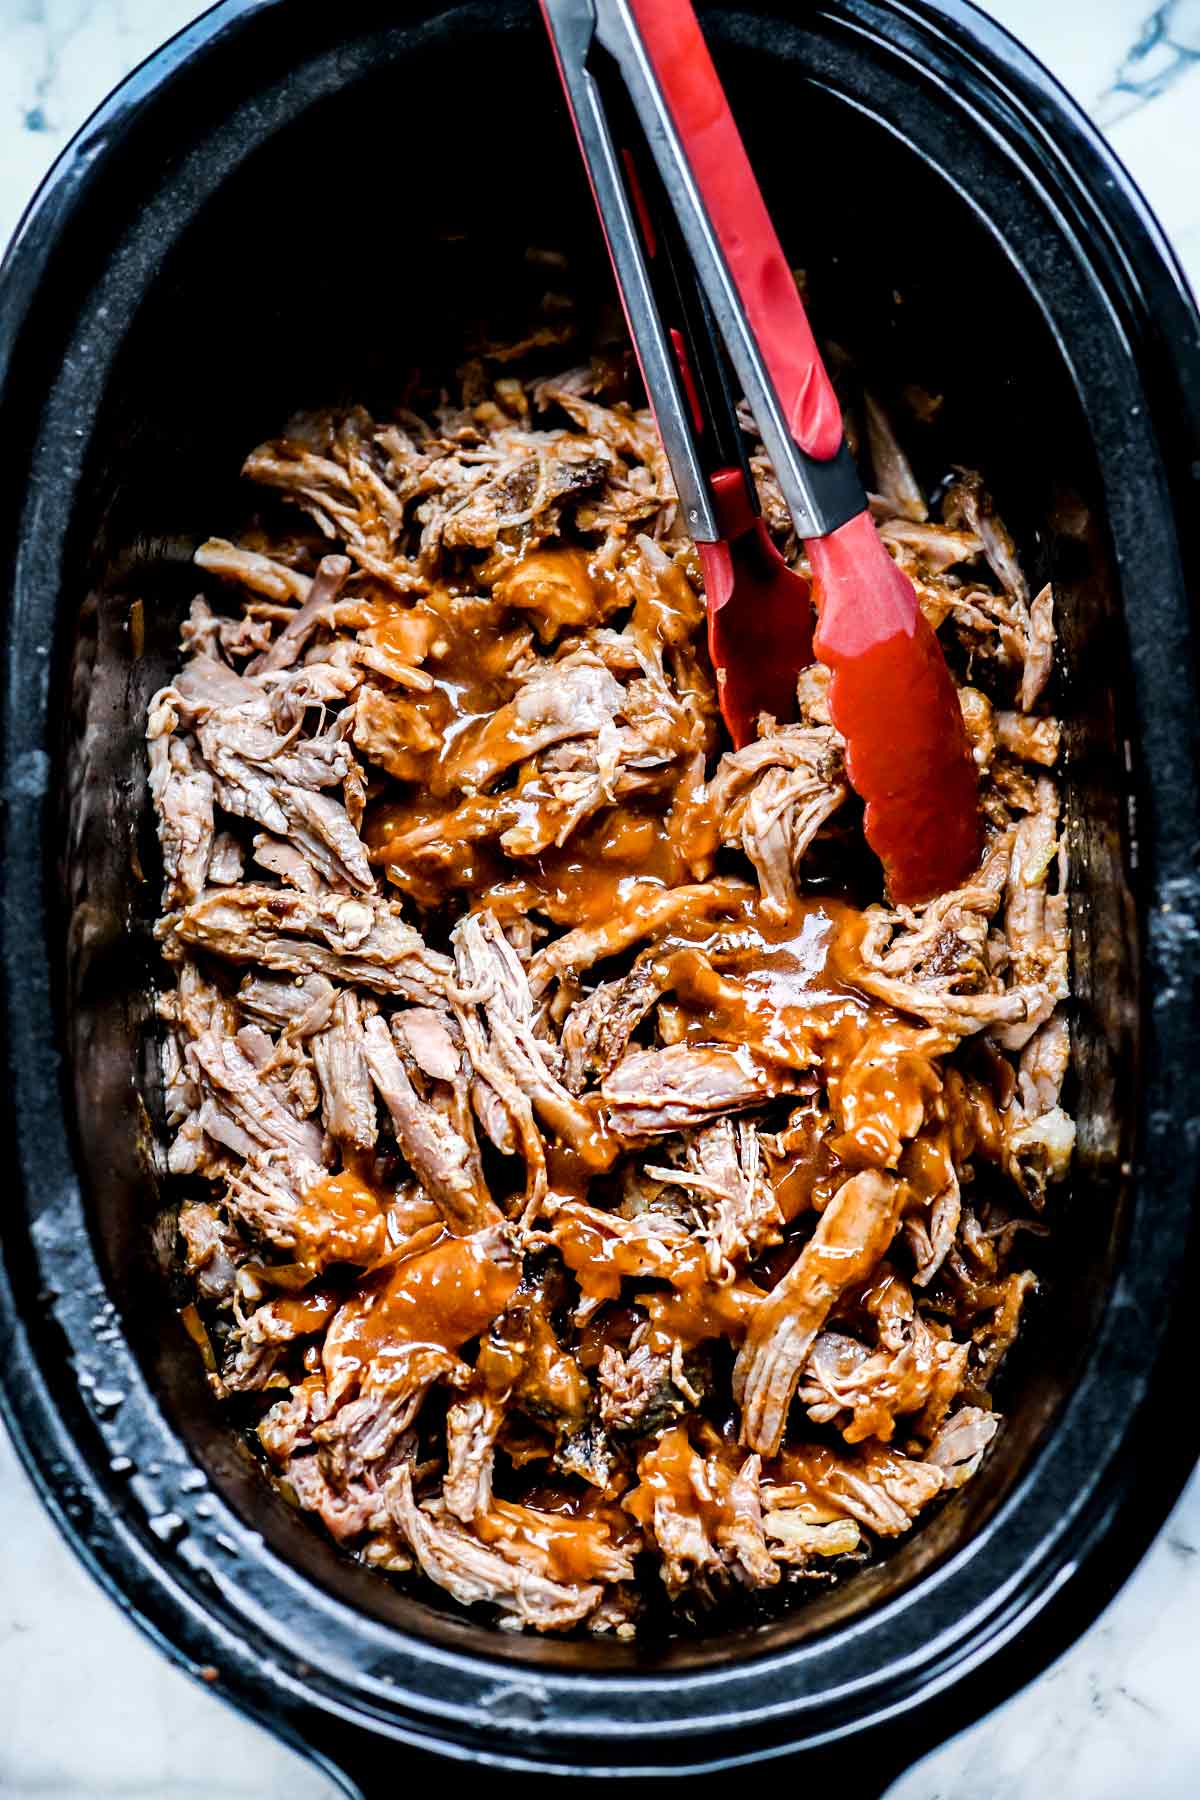 Best Slow-Cooker Pulled Pork - How to Make Pulled Pork in the Slow-Cooker